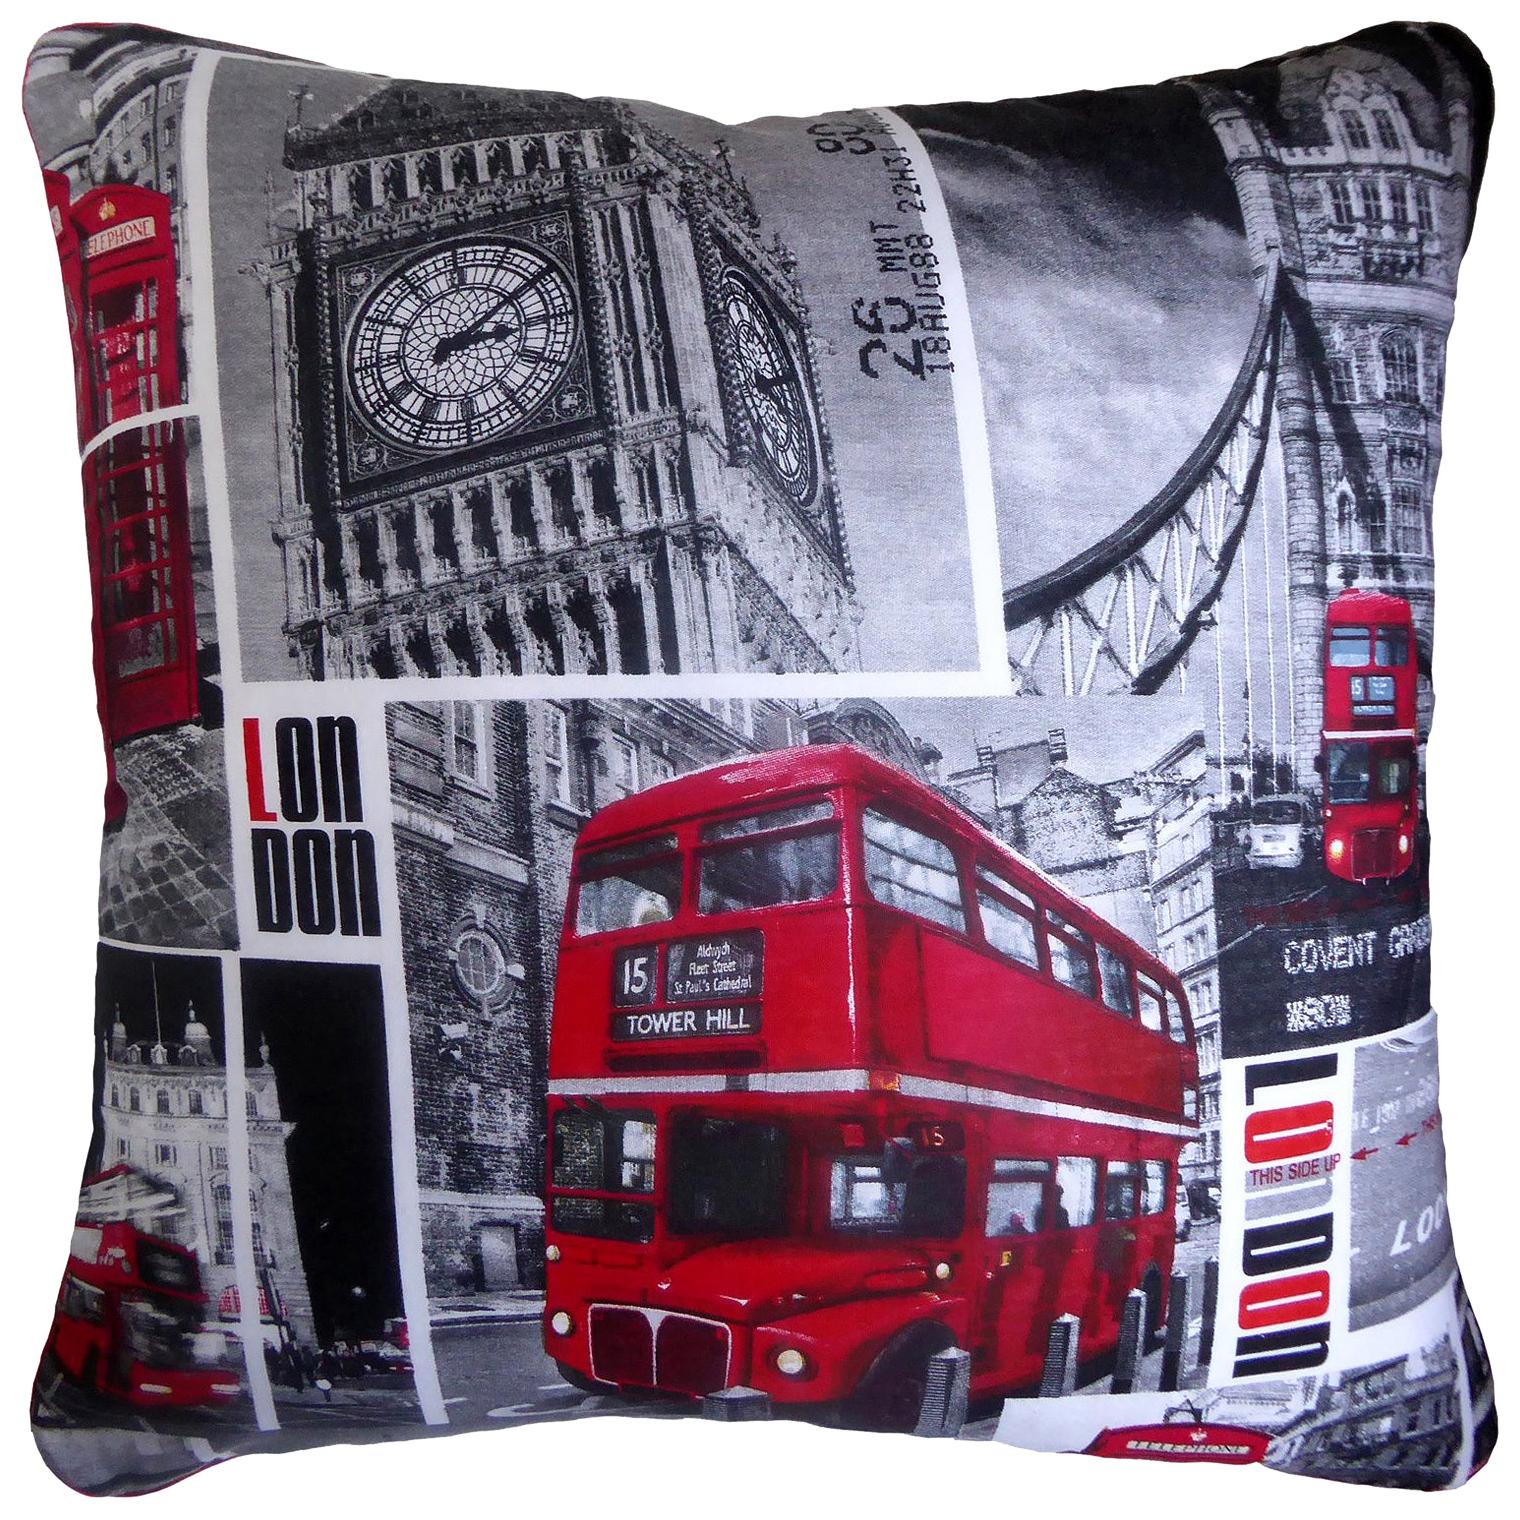 Vintage Cushion "London" Featuring the Iconic London Bus Pillow, Made in London